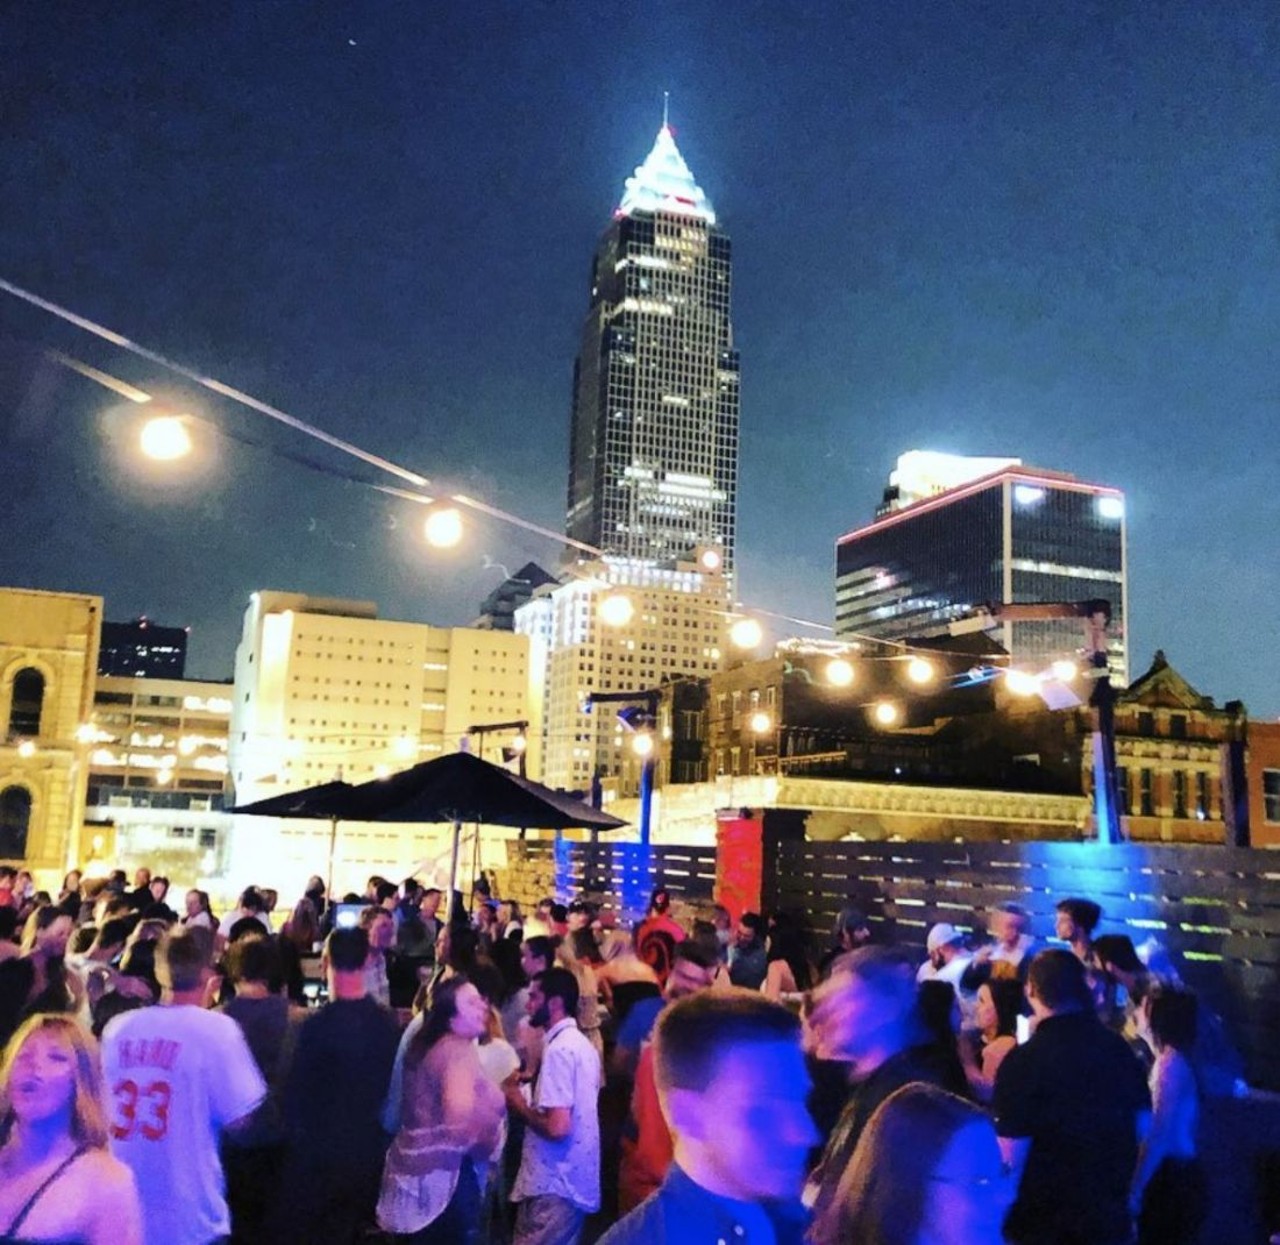  Velvet Dog
1280 West Sixth St., Cleveland
The three-story Warehouse district bar boasts the only rooftop in this nightlife-filled district. And it&#146;s always a good time.
Photo via @BuckeyeStateProud/Instagram